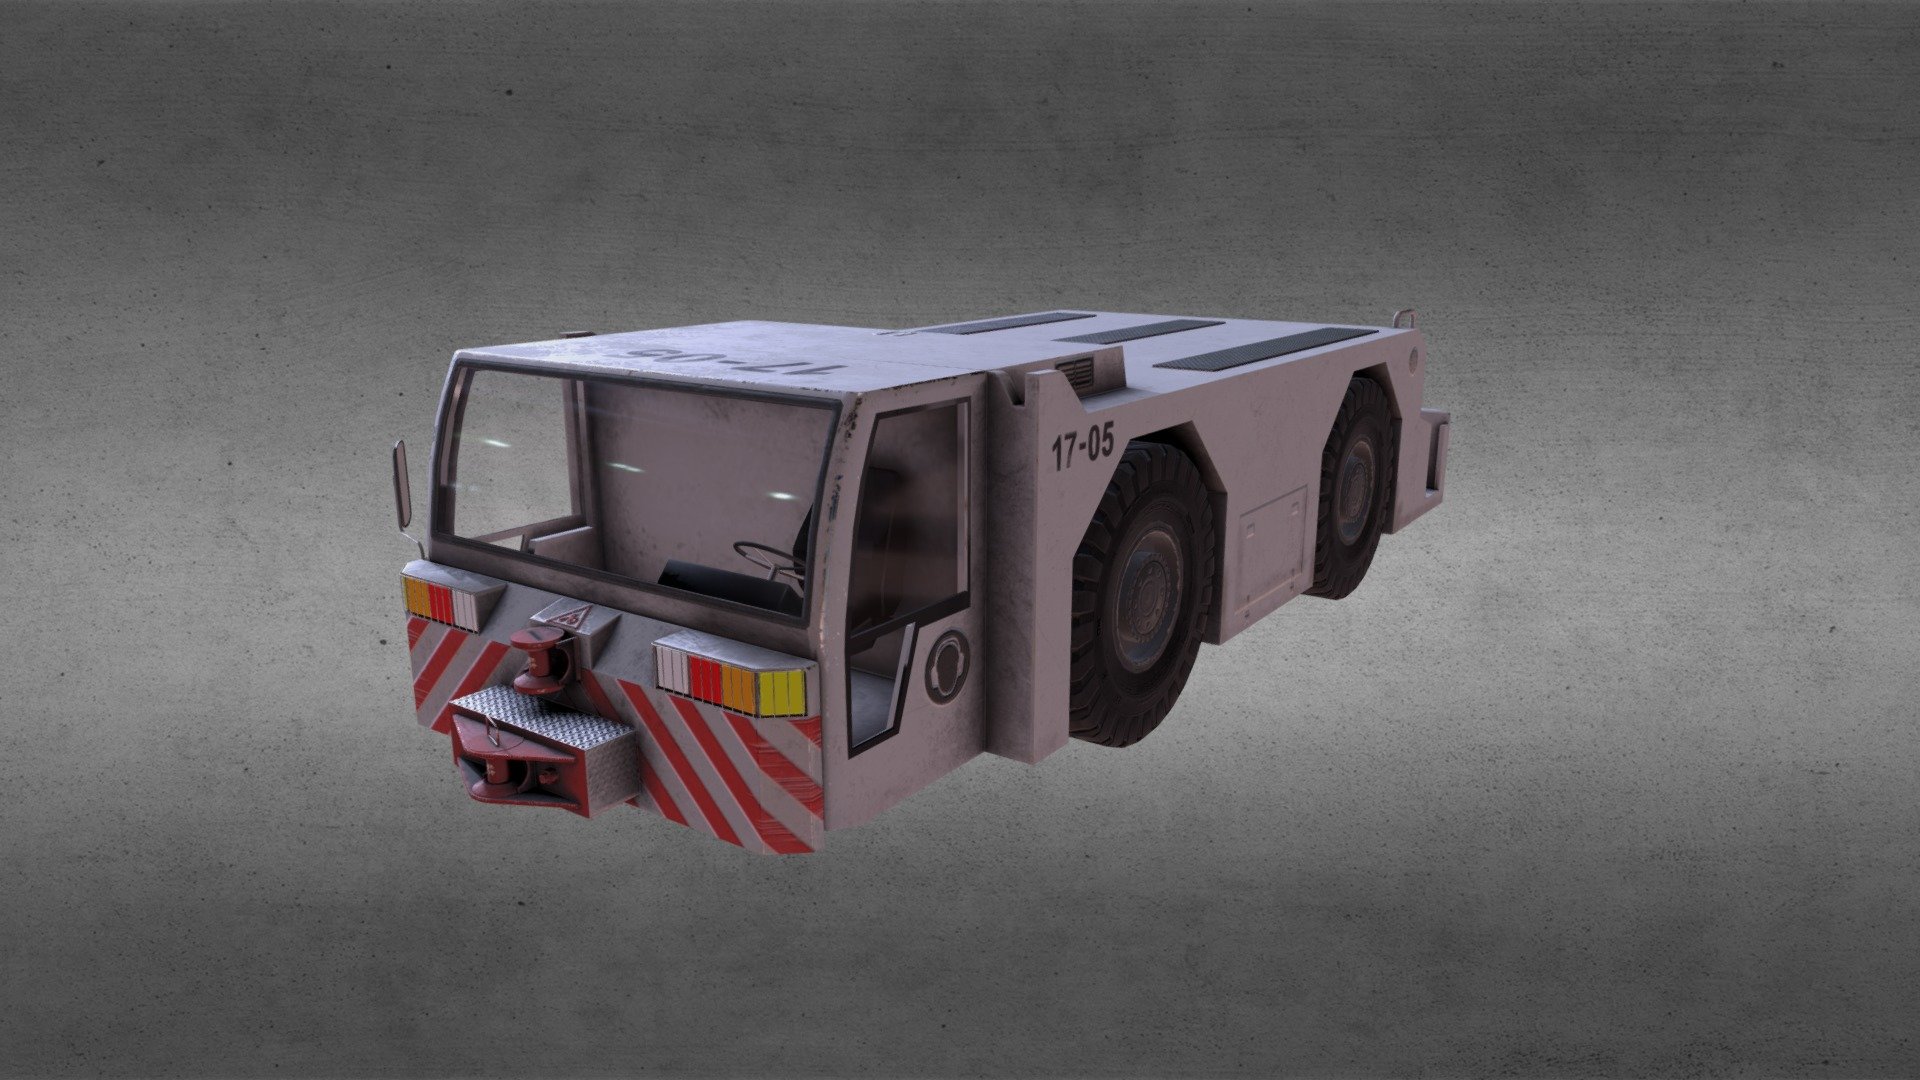 A Static vehicle for a current project 3d model